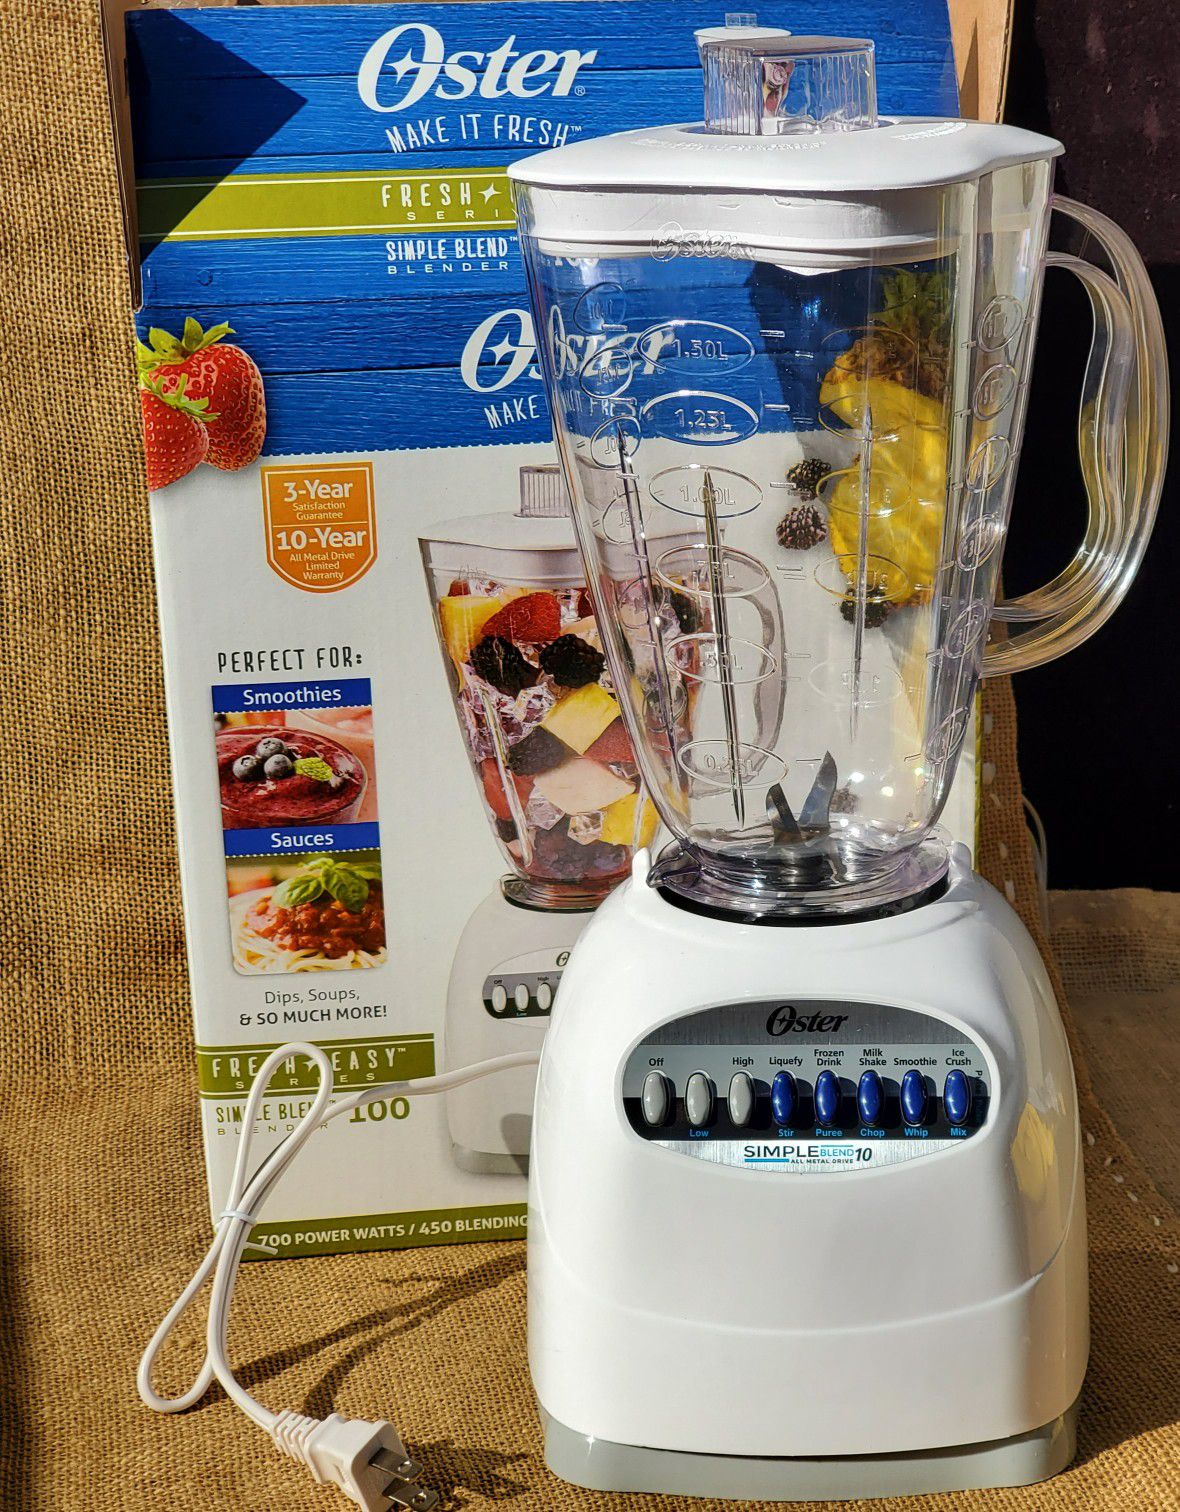 NEW Oster 10 Speed blender with 6 cup plastic jar